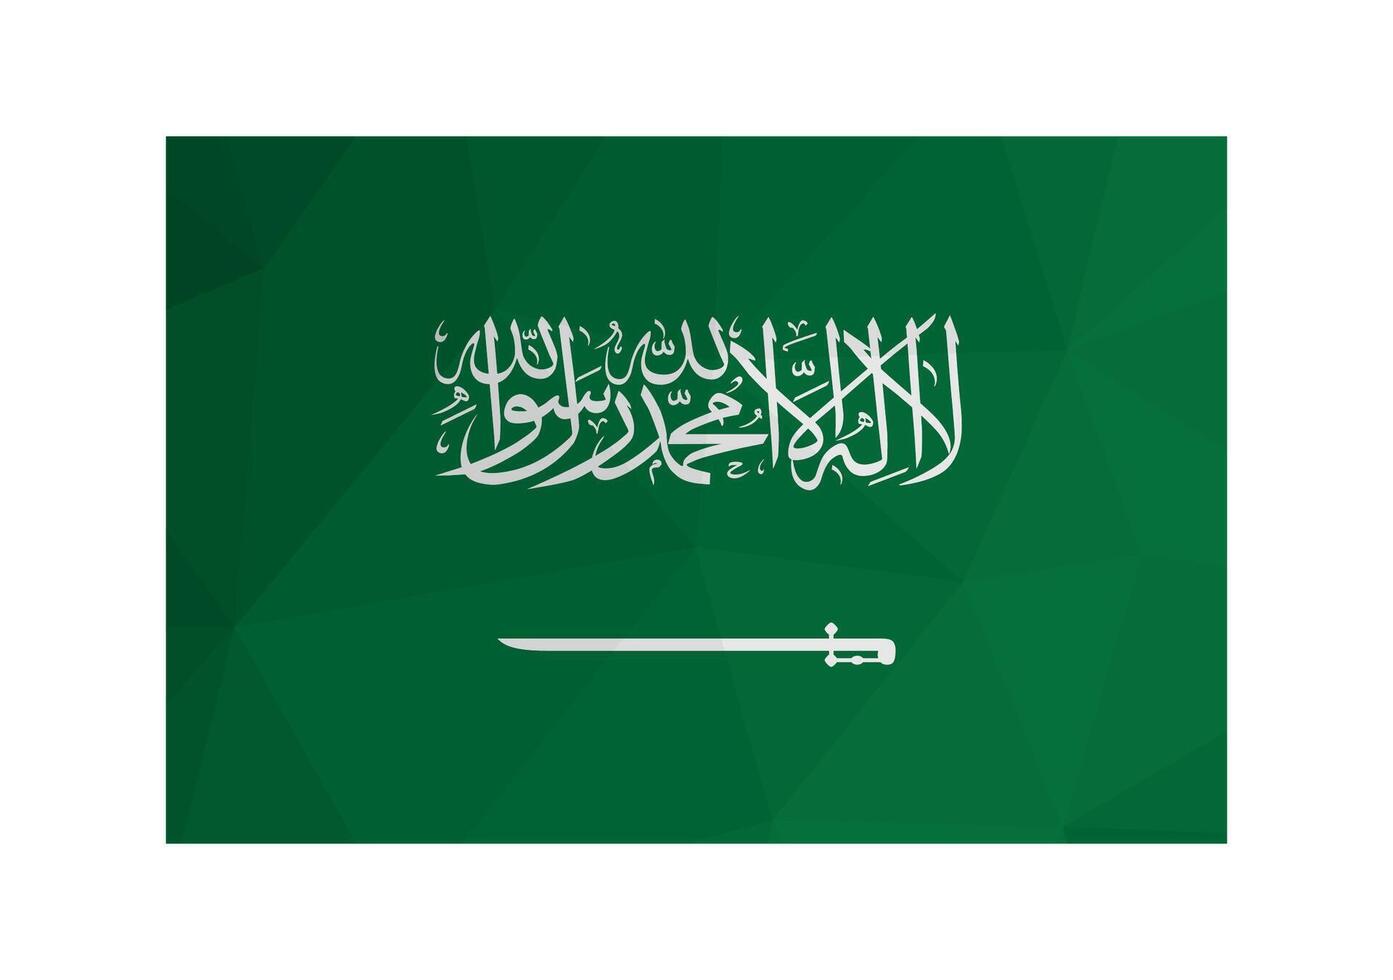 Vector illustration. Official ensign of Saudi Arabia. National flag with Arabic text shahada on green background. Creative design in low poly style with triangular shapes